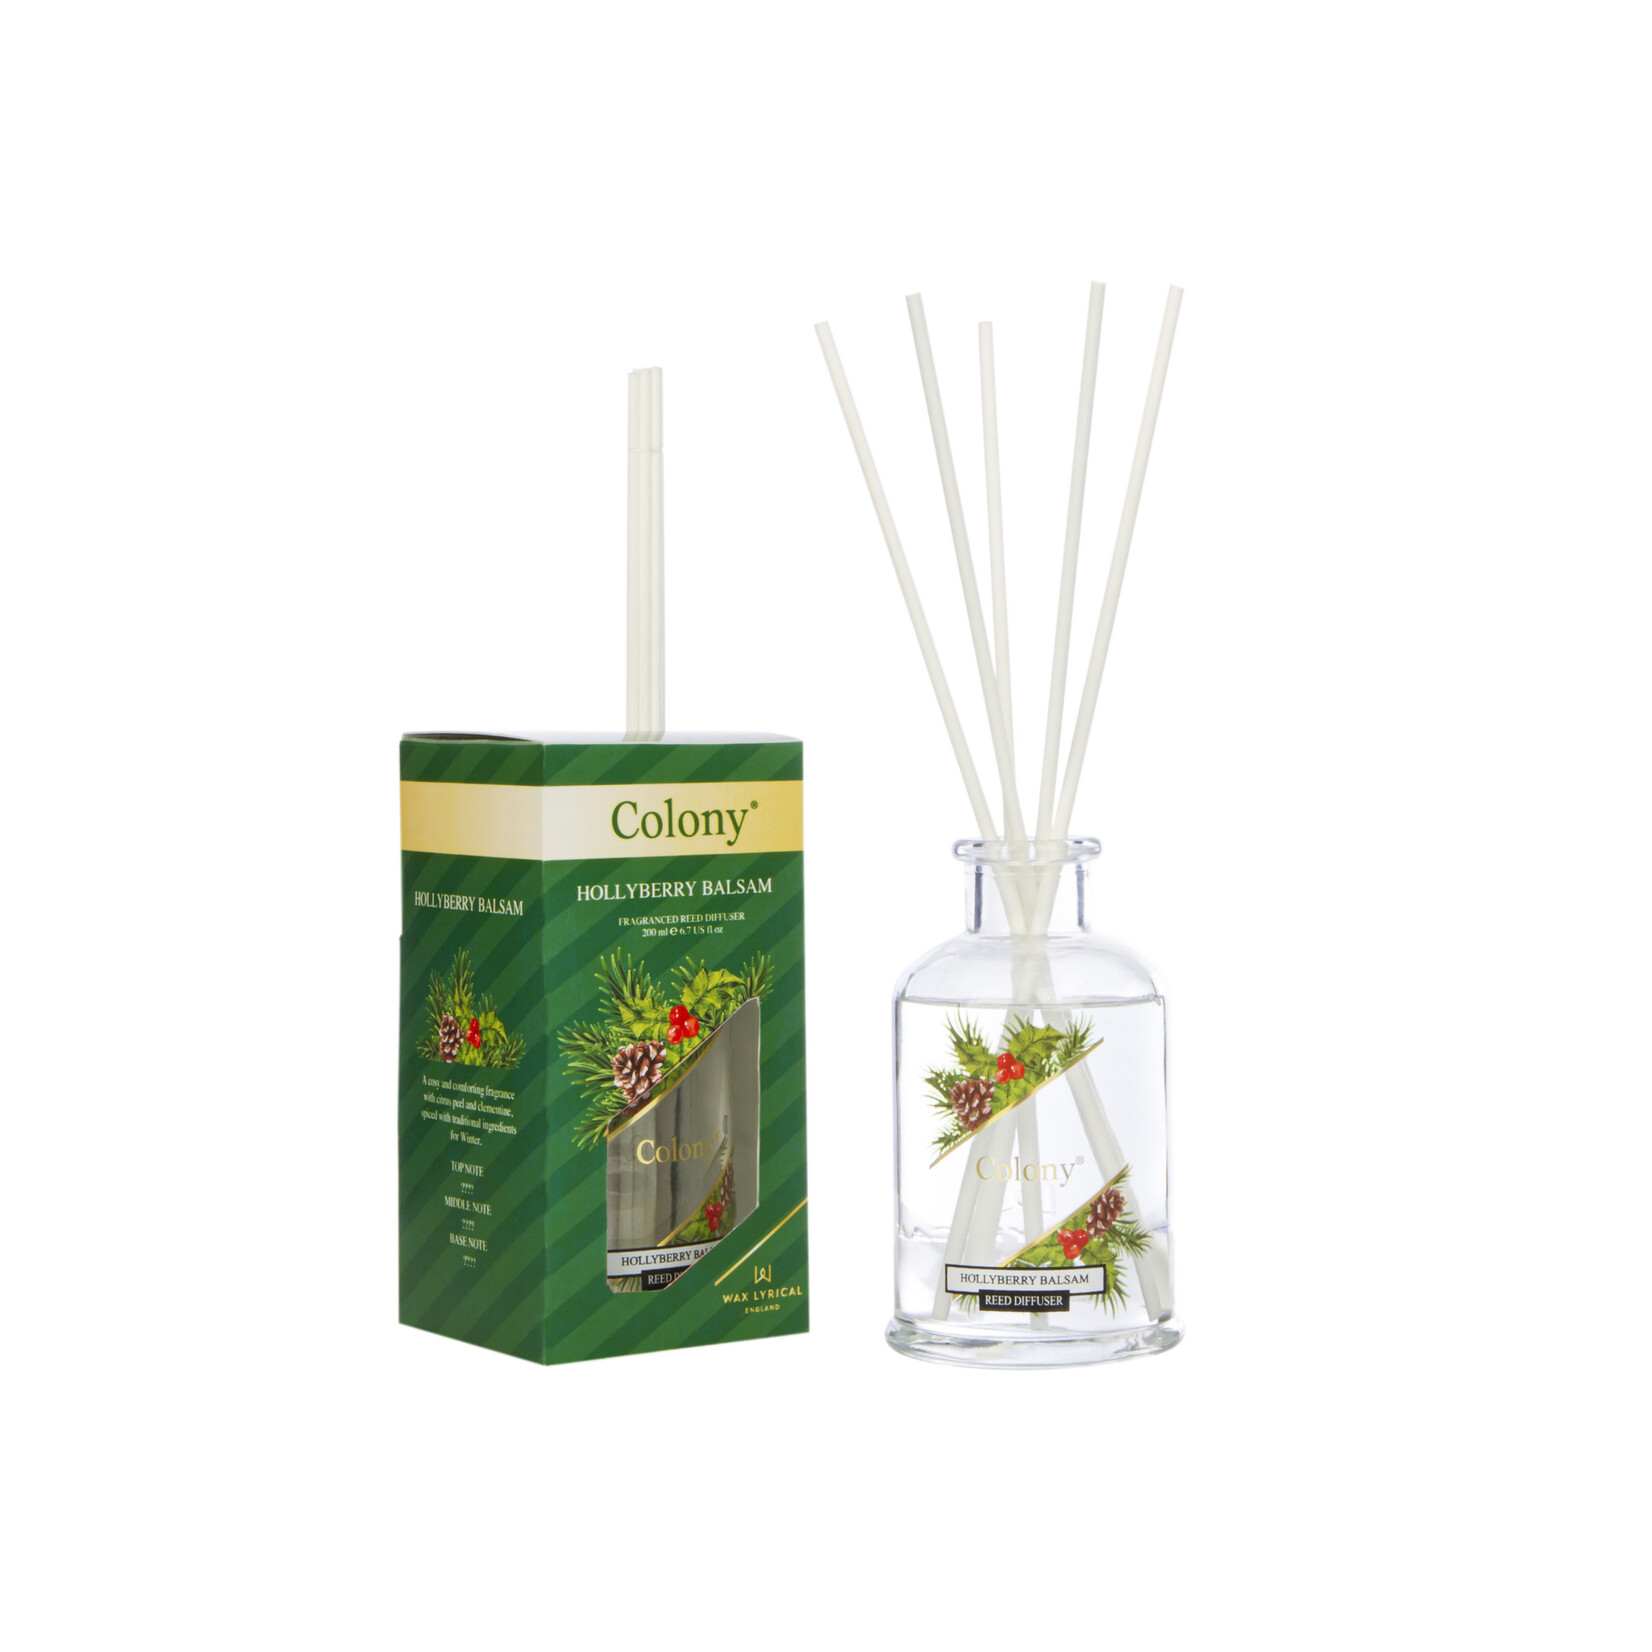 Wax Lyrical Colony #789854 Hollyberry Balsam Small Reed Diffuser 100ml